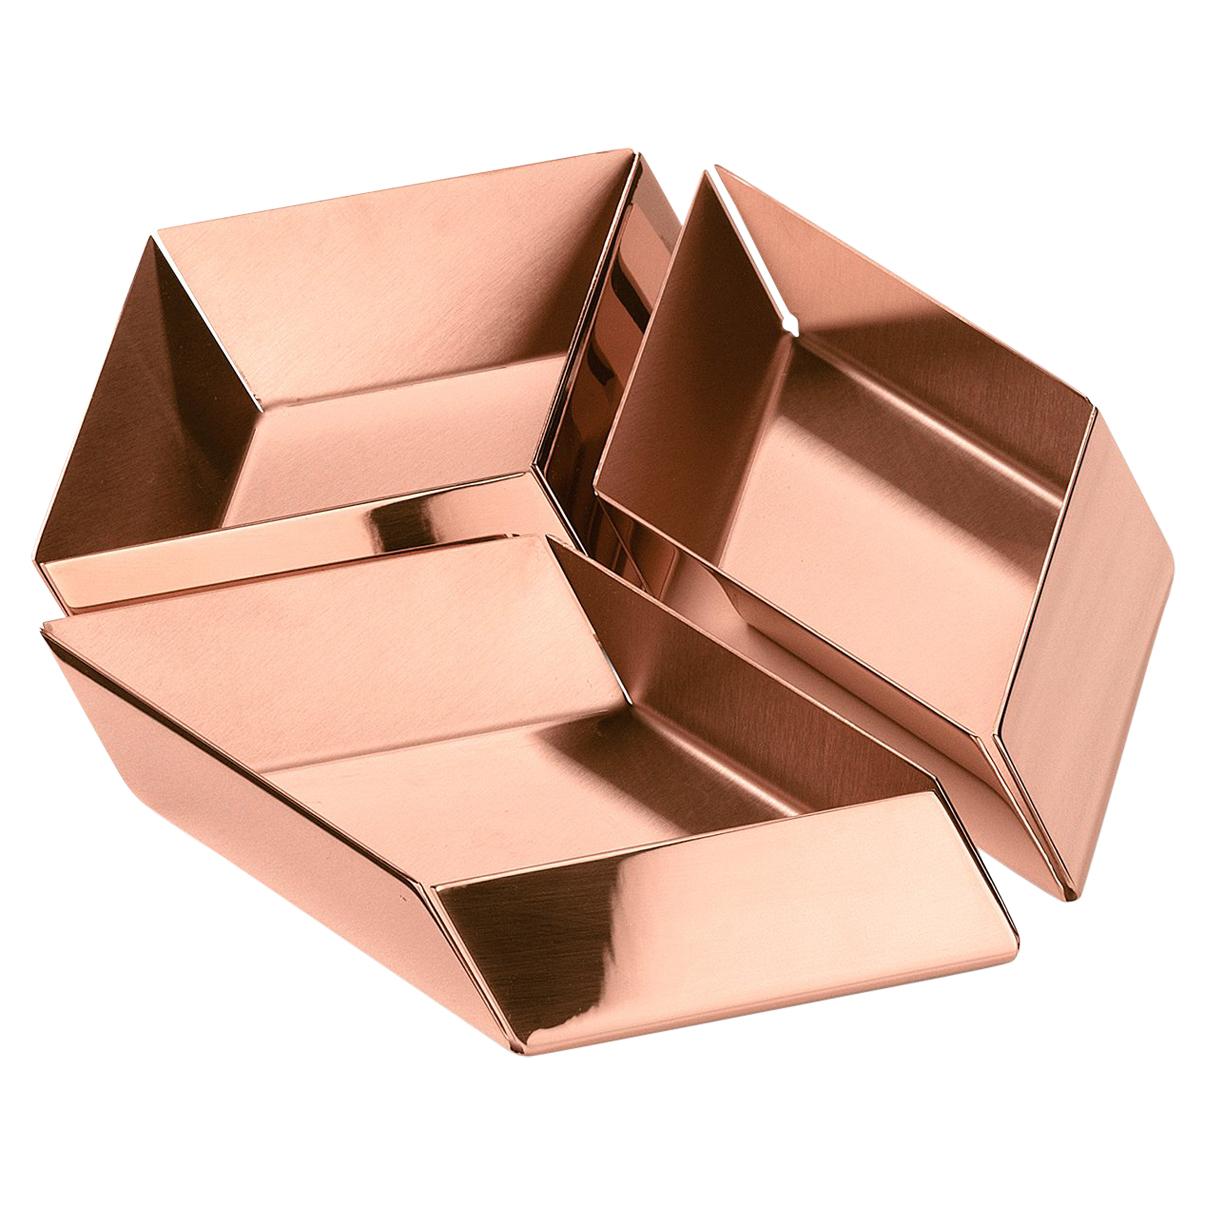 Ghidini 1961 Axonometry Small Cube Tray in Copper by Elisa Giovanni For Sale